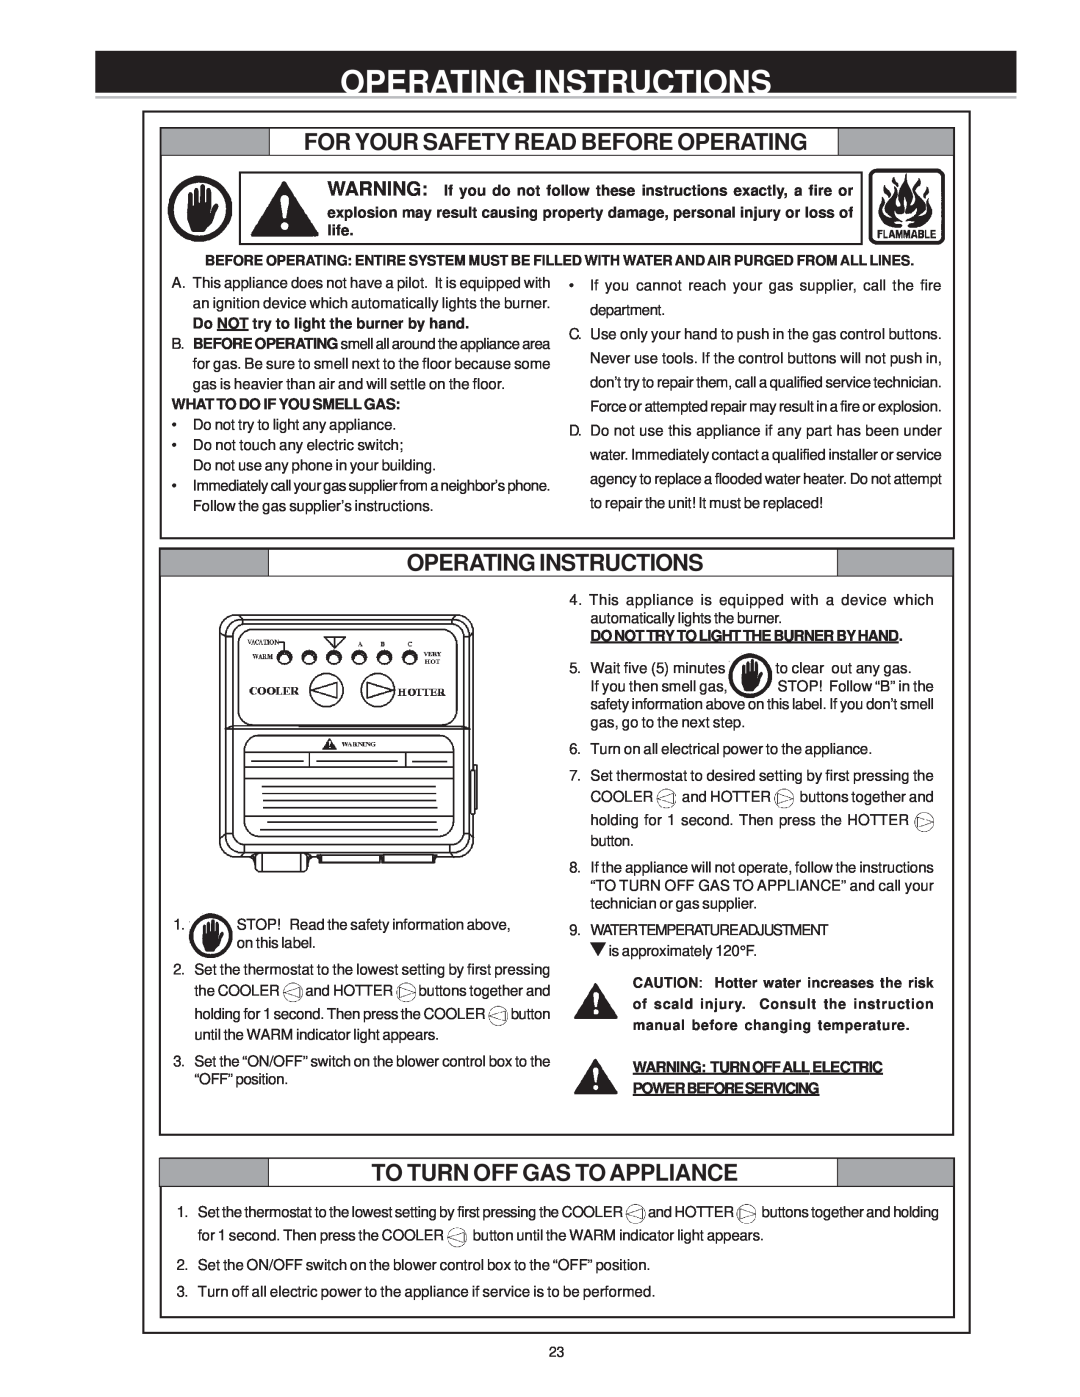 Maytag HV640HBVITCGA manual Operating Instructions, For Your Safety Read Before Operating, To Turn Off Gas To Appliance 